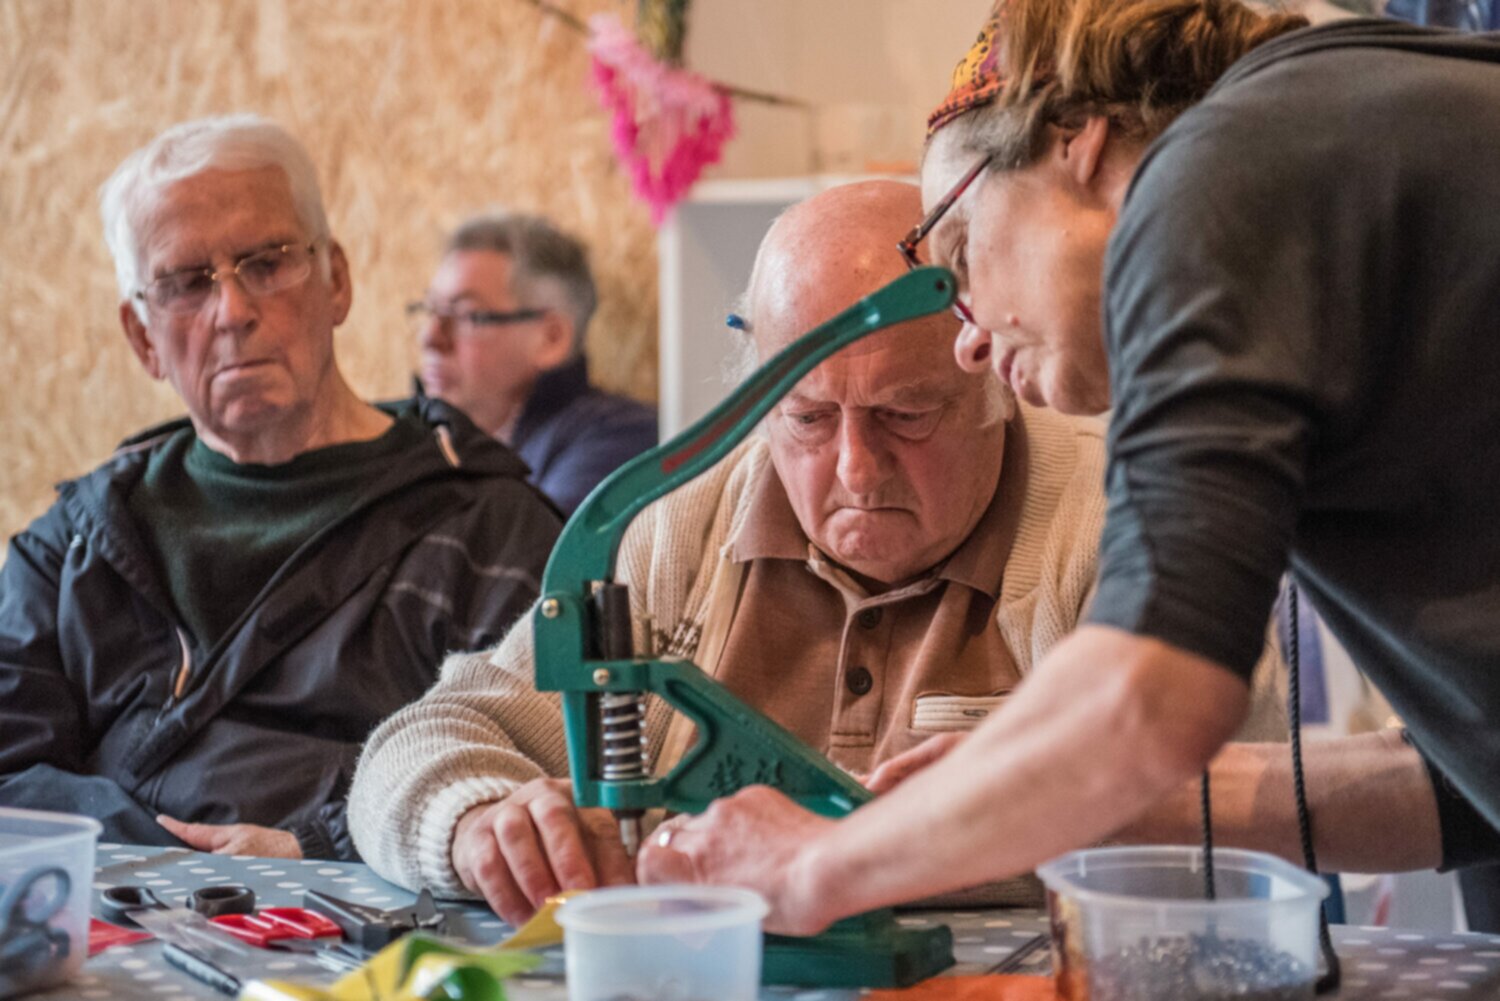 Arts Group Letting in the Light Comes to Men in Sheds